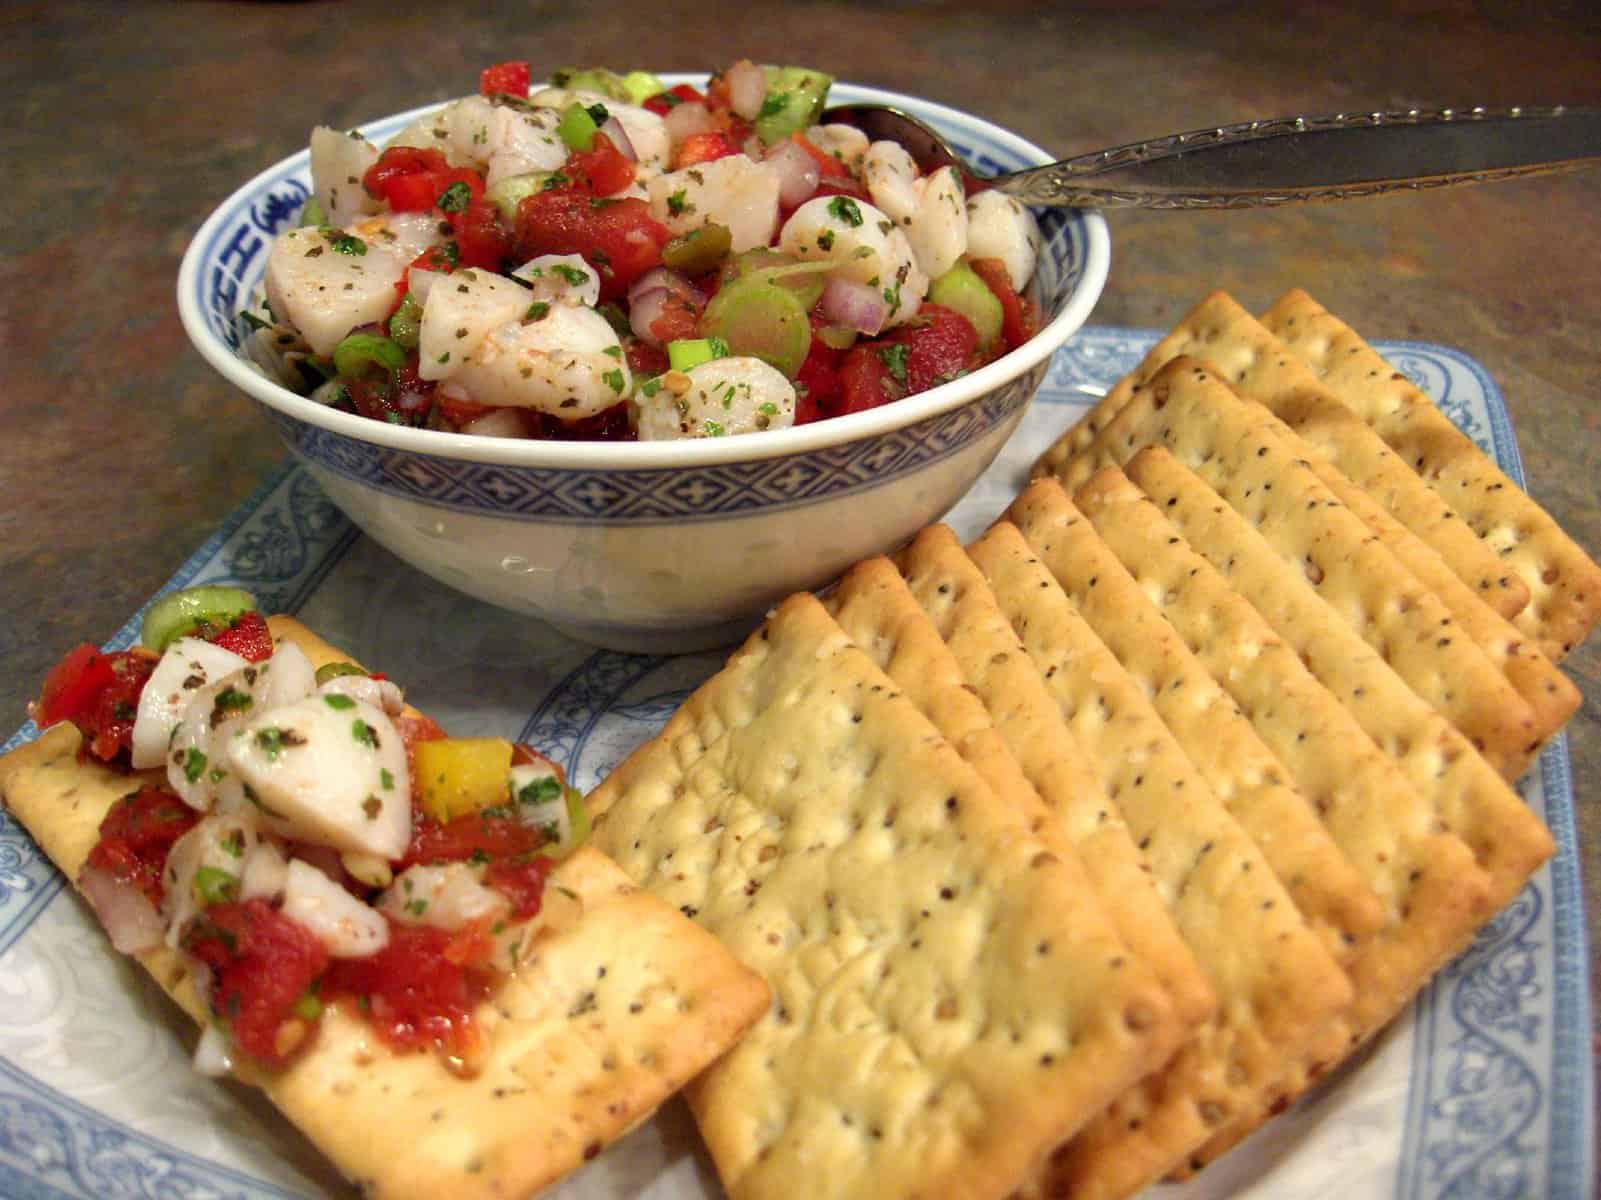  A refreshing and colorful appetizer that will transport you to the coast of Mexico!